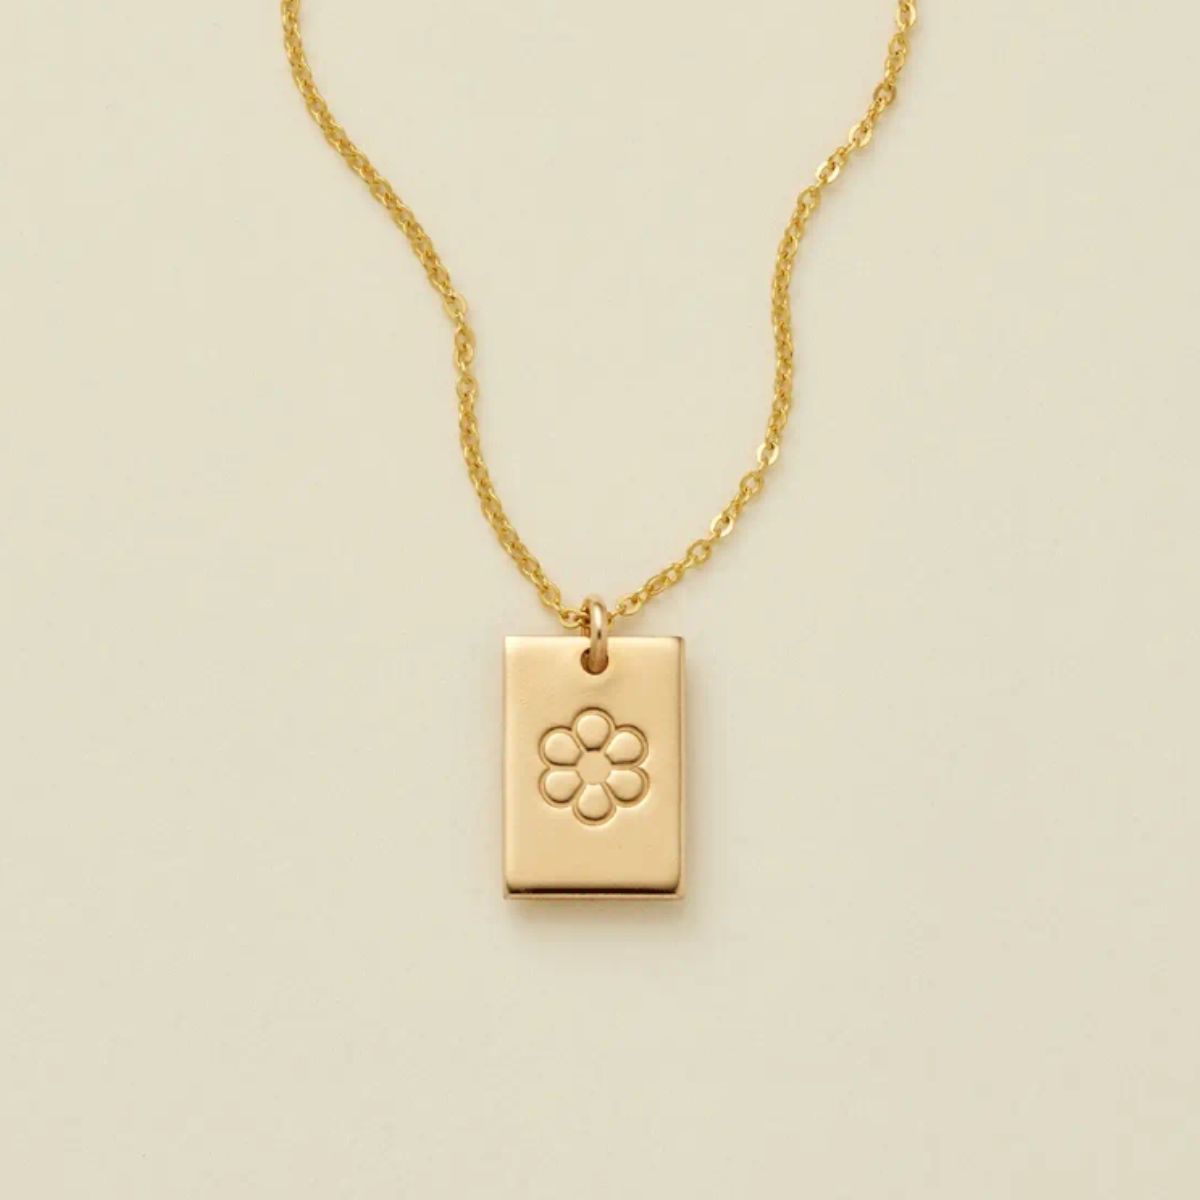 Made by Mary Gold Filled Rectangle Good Vibes Stamp Necklace - Daisy